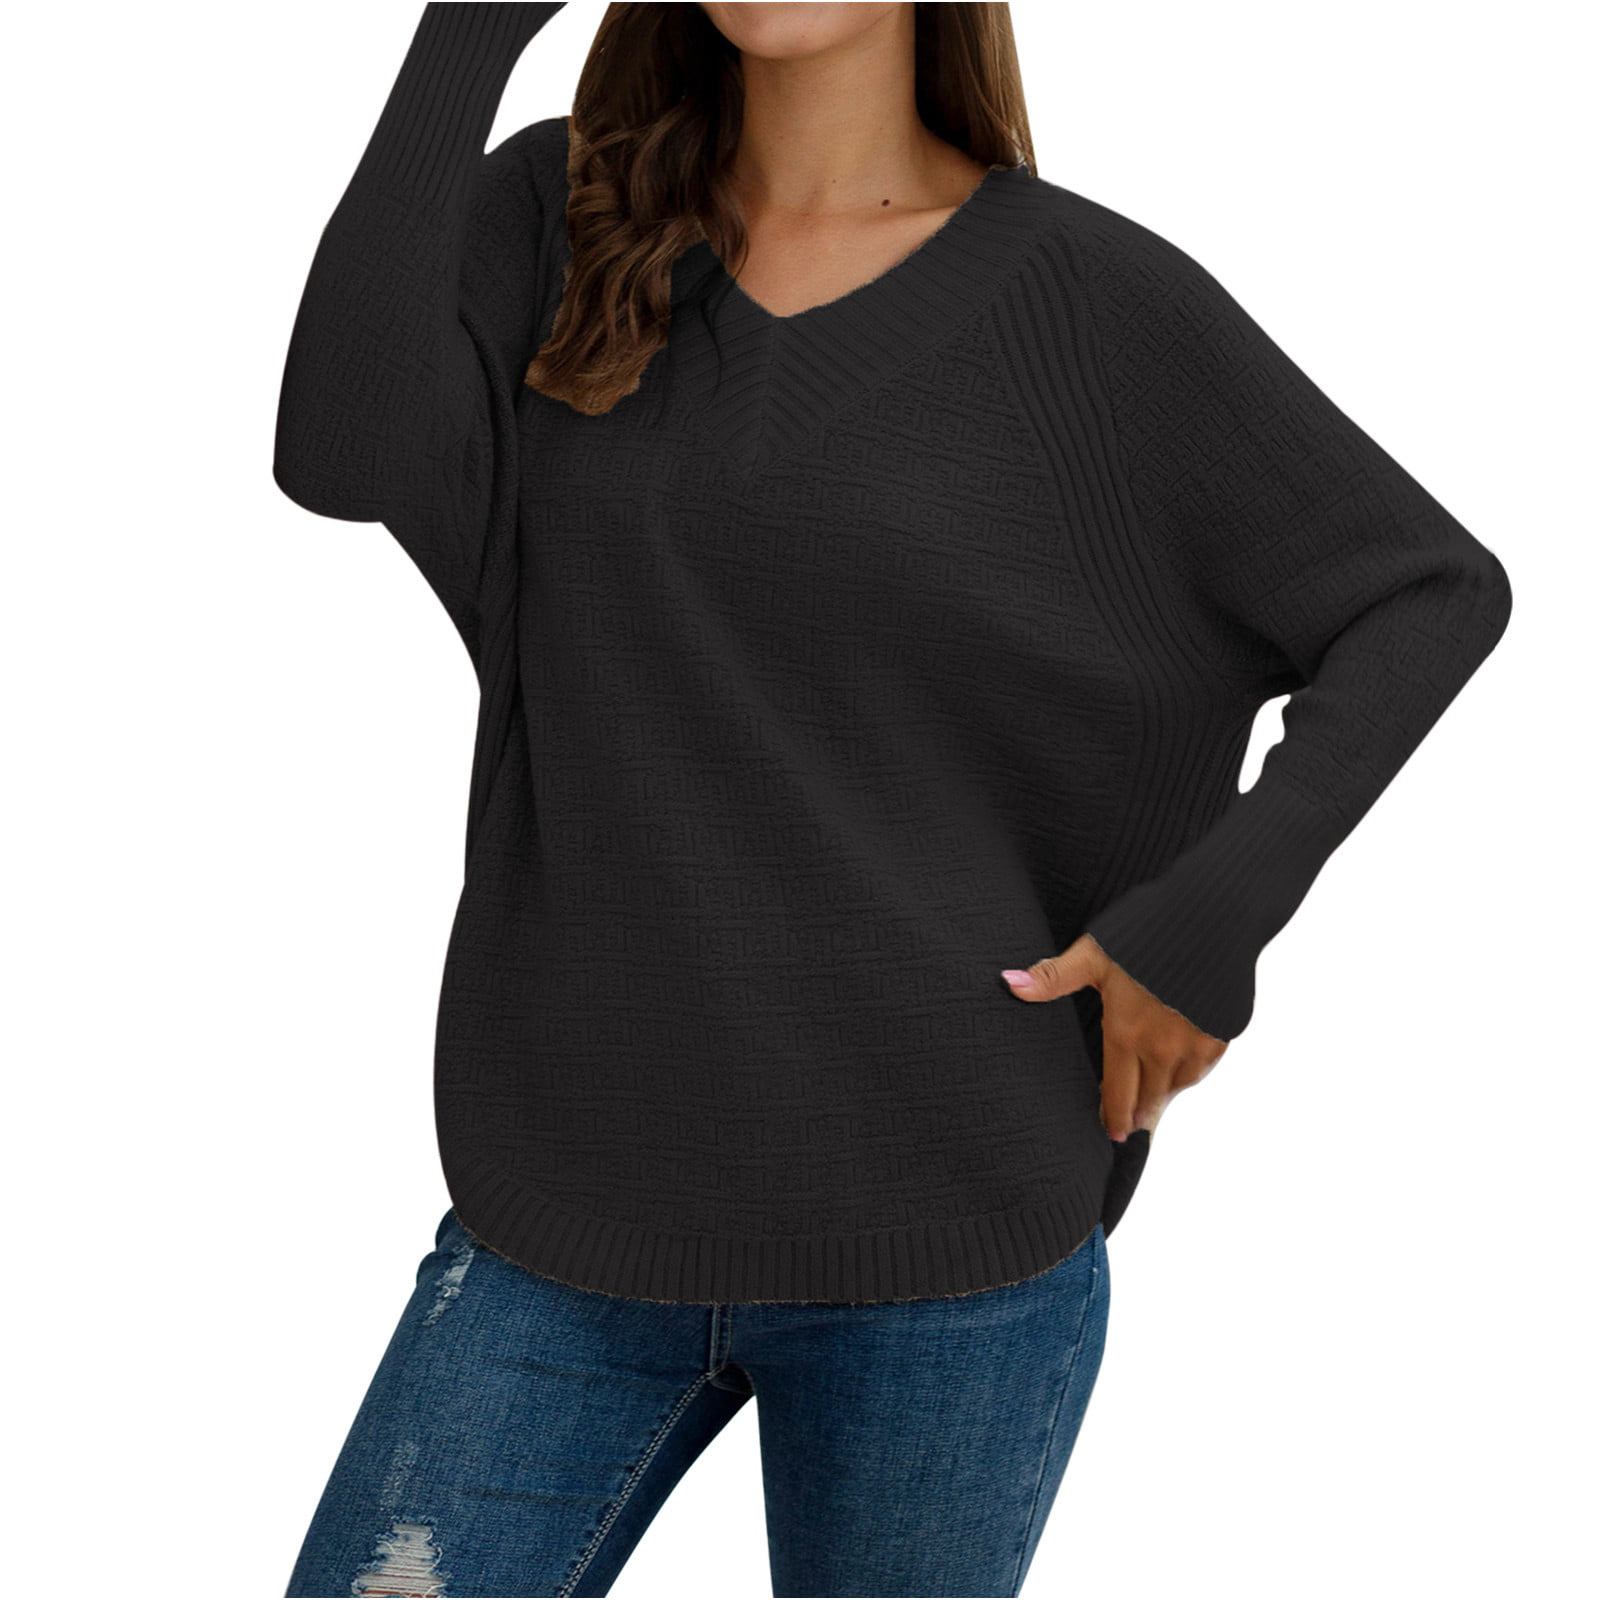 XFLWAM Women's Batwing Sleeve Off Shoulder Loose Oversized Baggy Tops  Sweater Pullover V Neck Casual Blouse T-Shirt Black S - Walmart.com